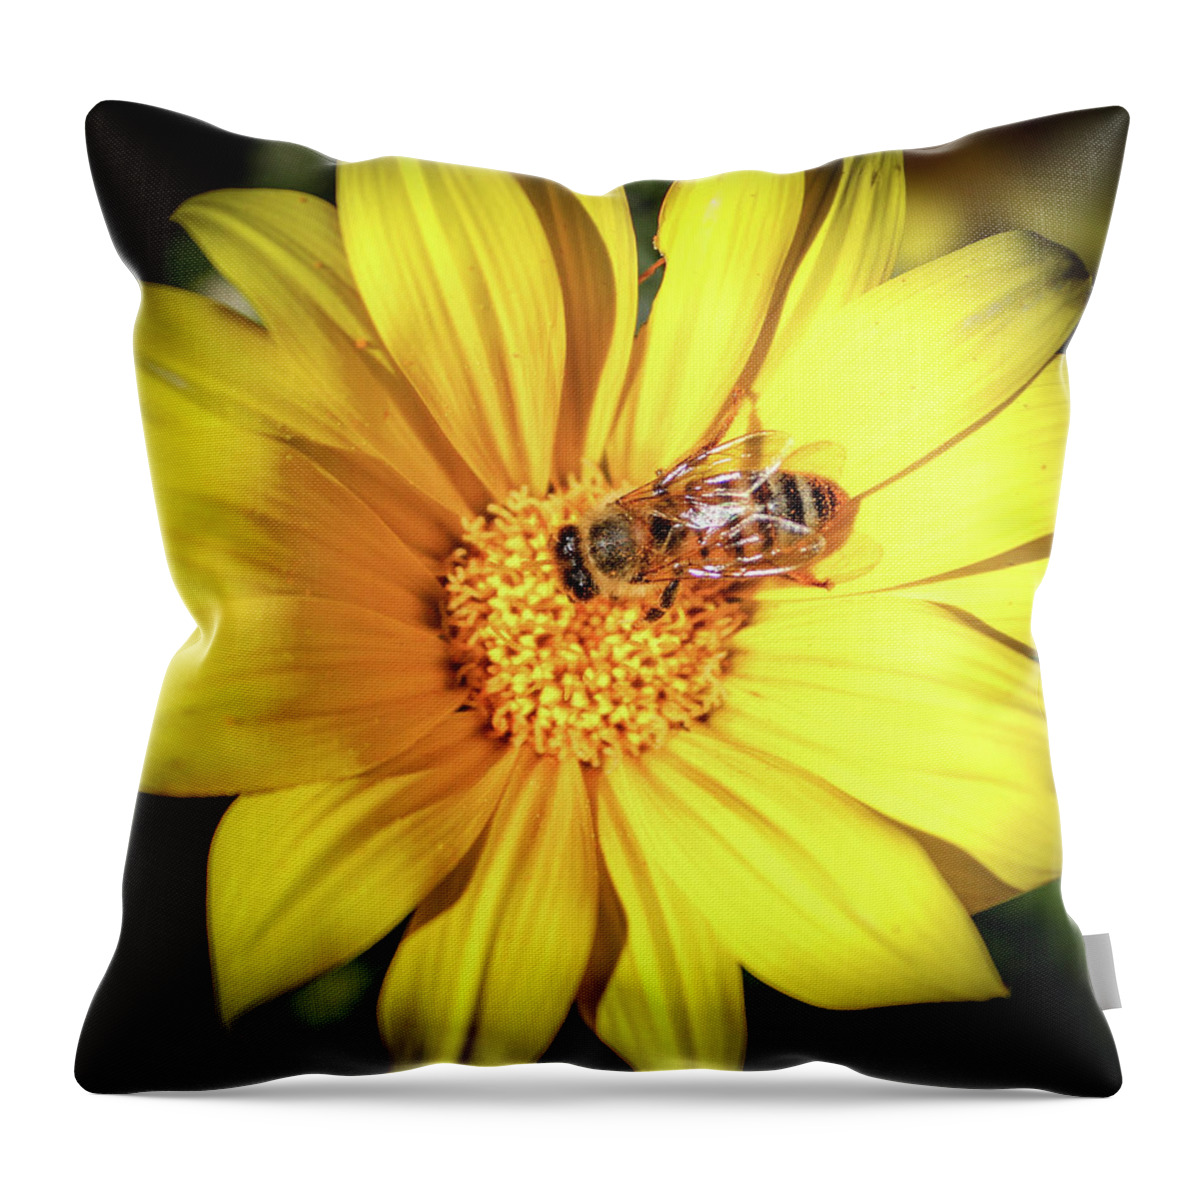 Bee Throw Pillow featuring the photograph Busy Bee by Alison Frank